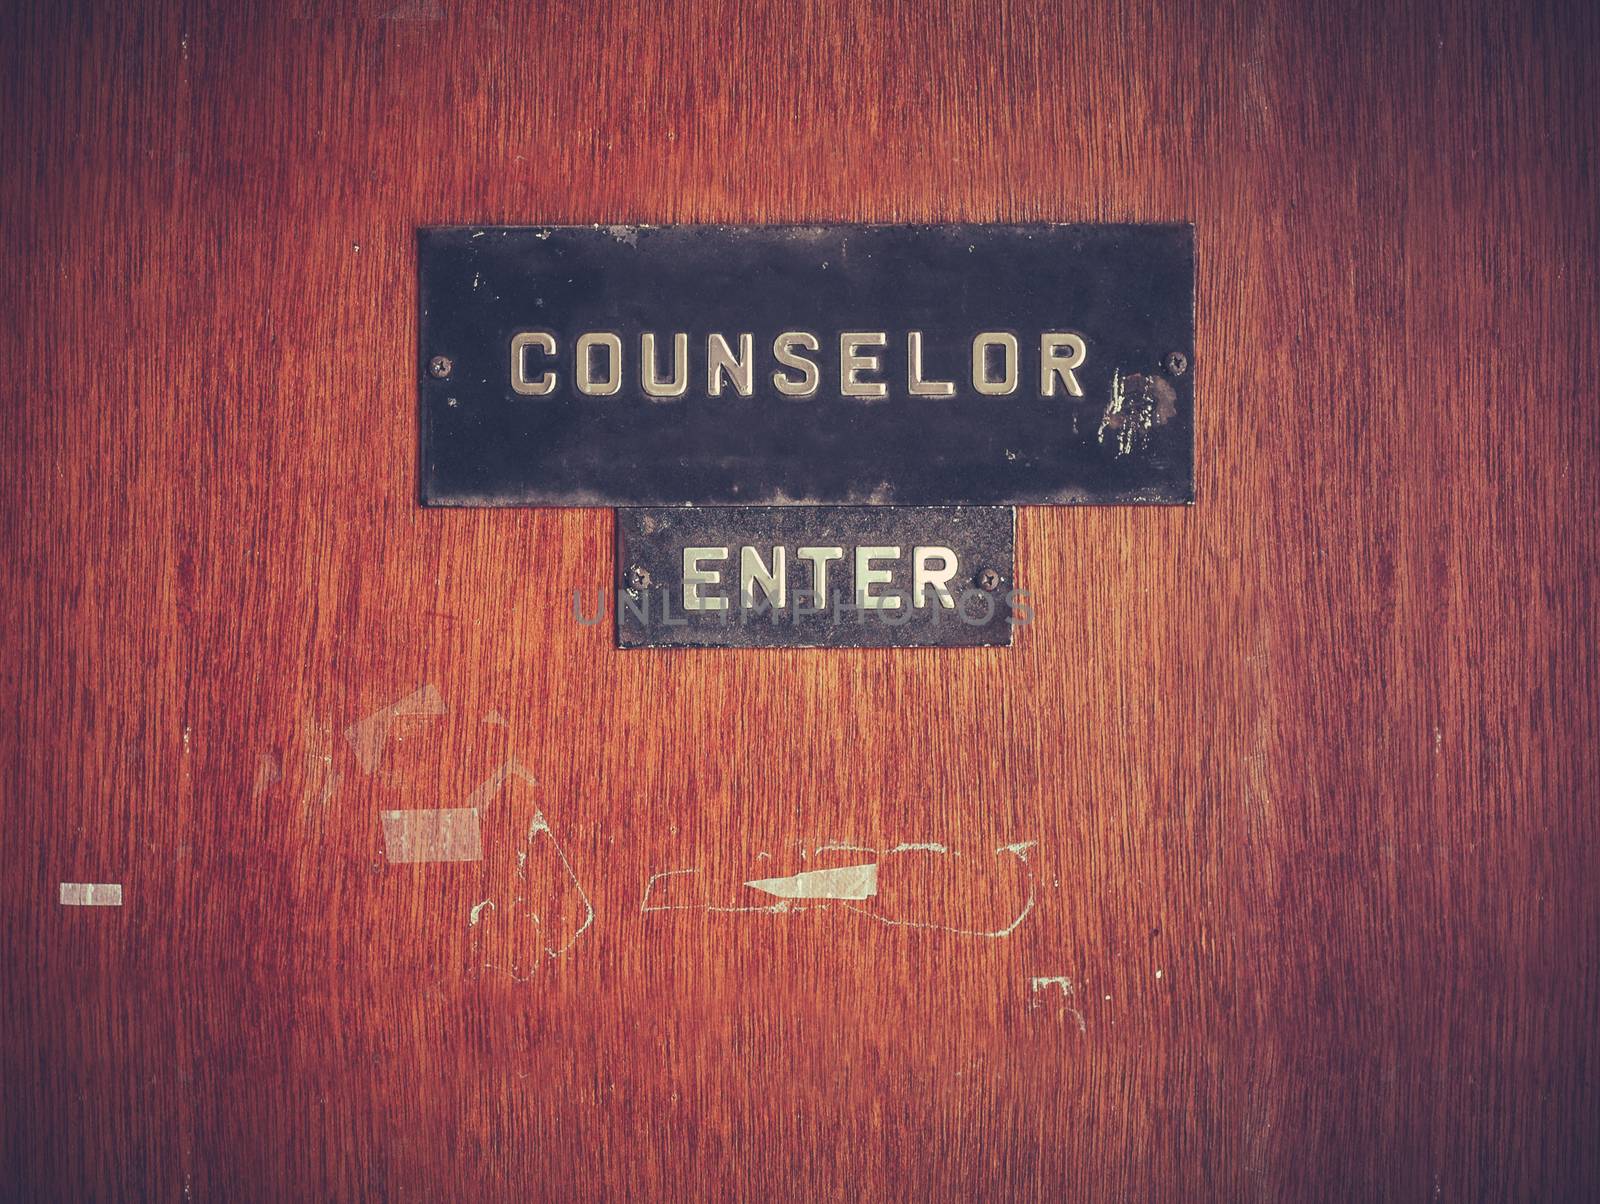 Retro Grungy Counselor's Office Door At A Public School Or University